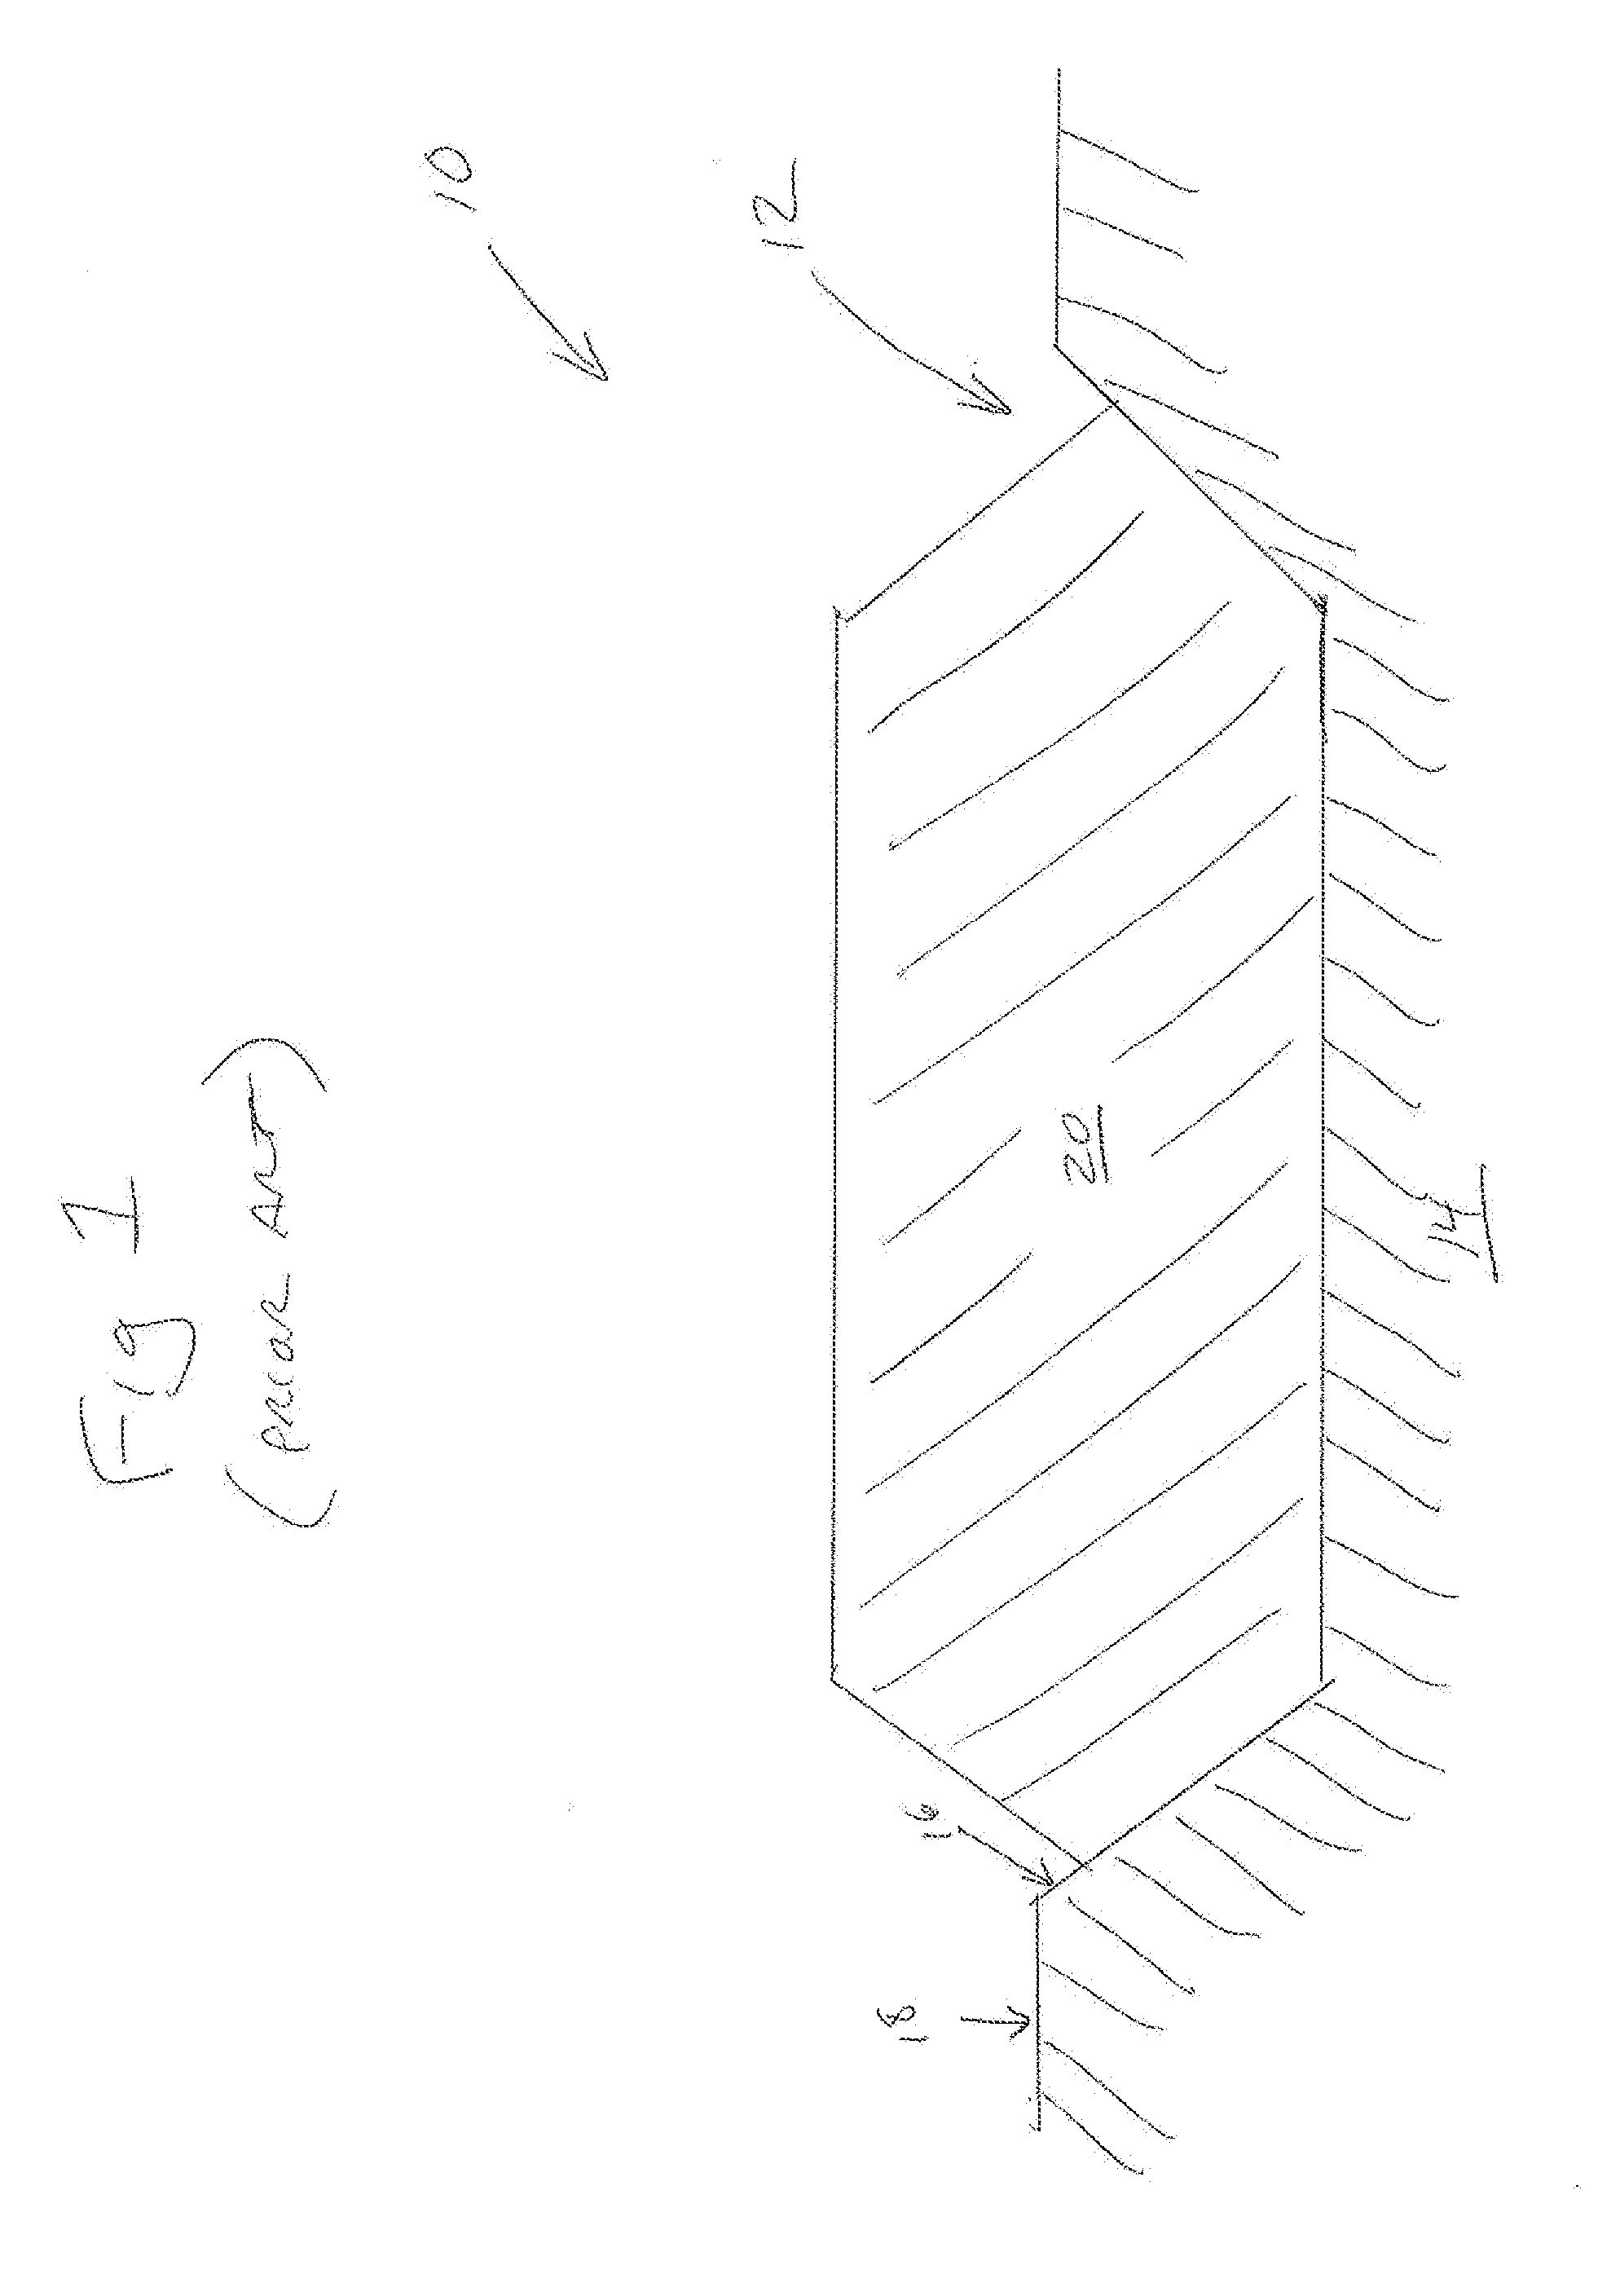 Berm and method of construction thereof